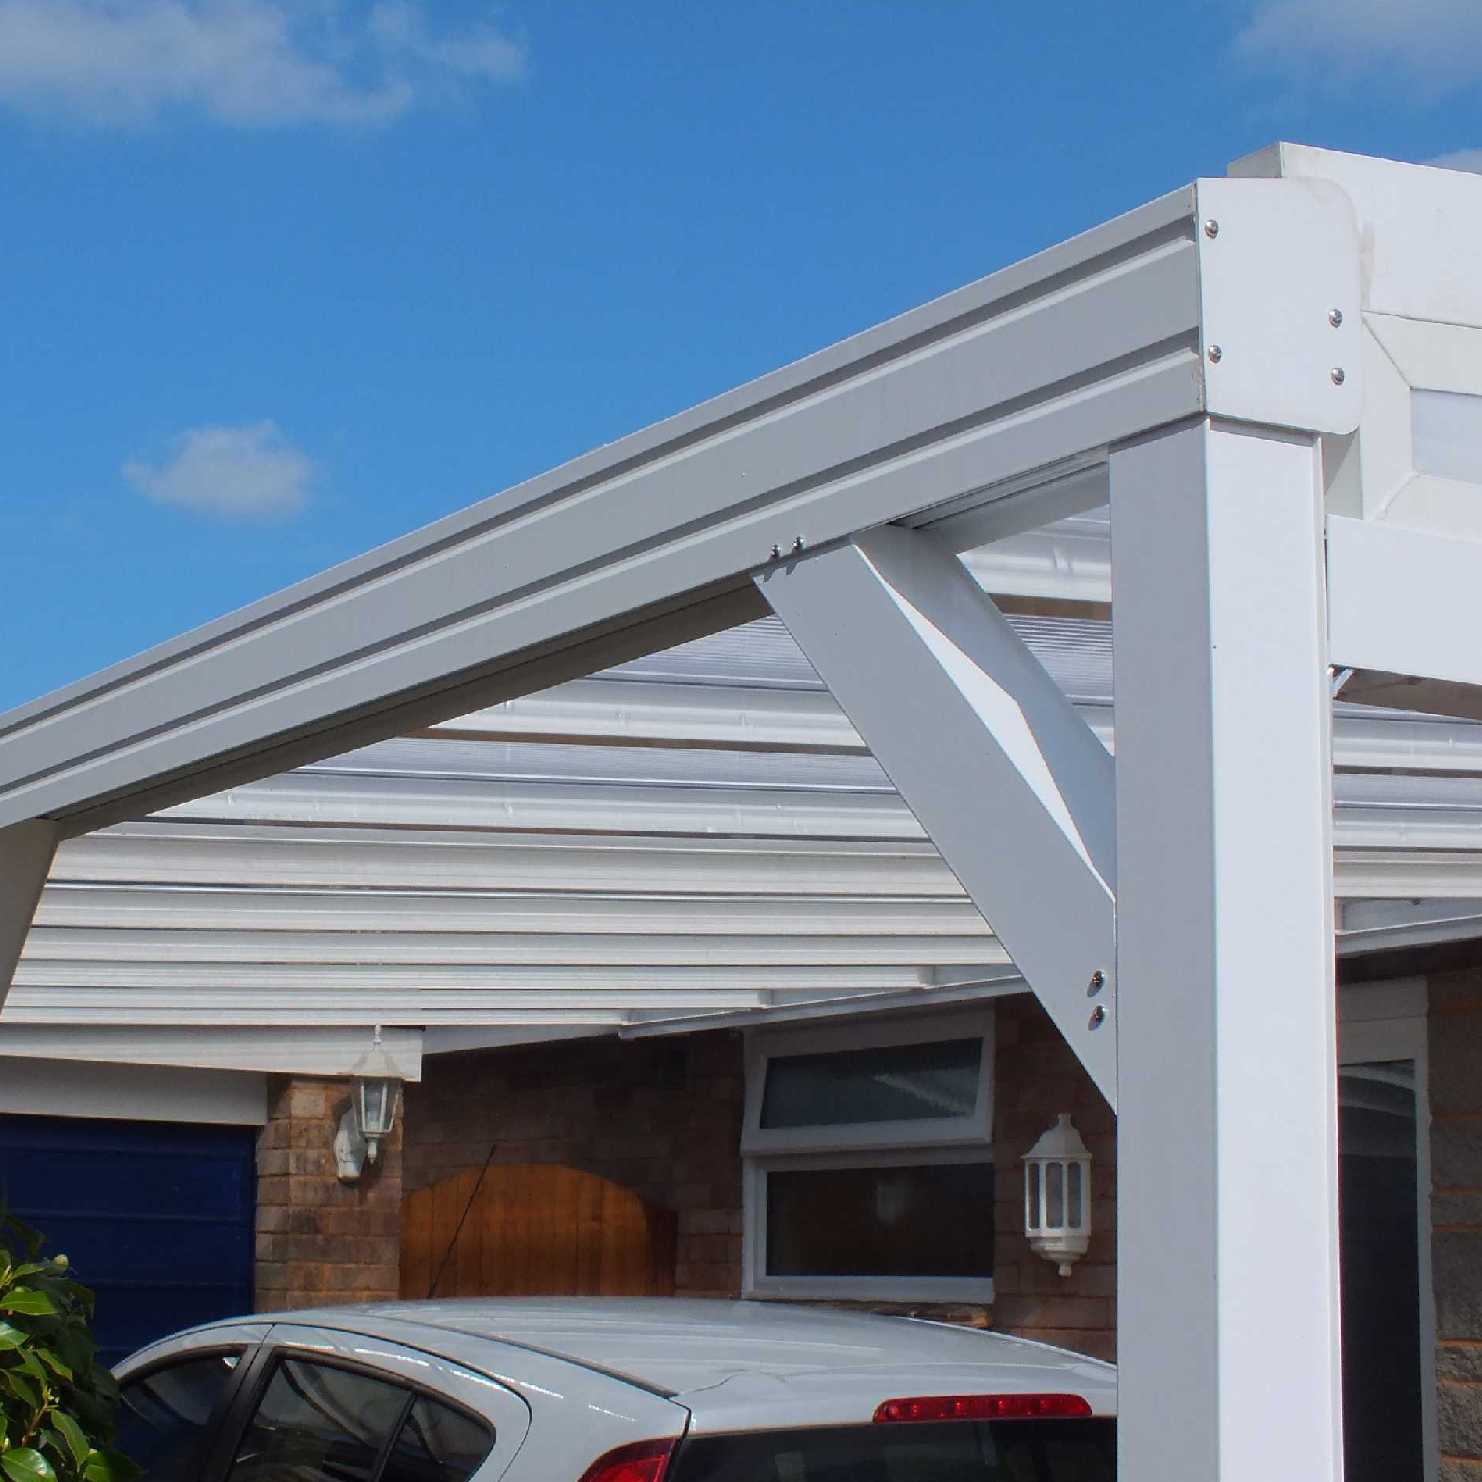 Great deals on Omega Smart Lean-To Canopy, White with 16mm Polycarbonate Glazing - 7.4m (W) x 3.0m (P), (4) Supporting Posts